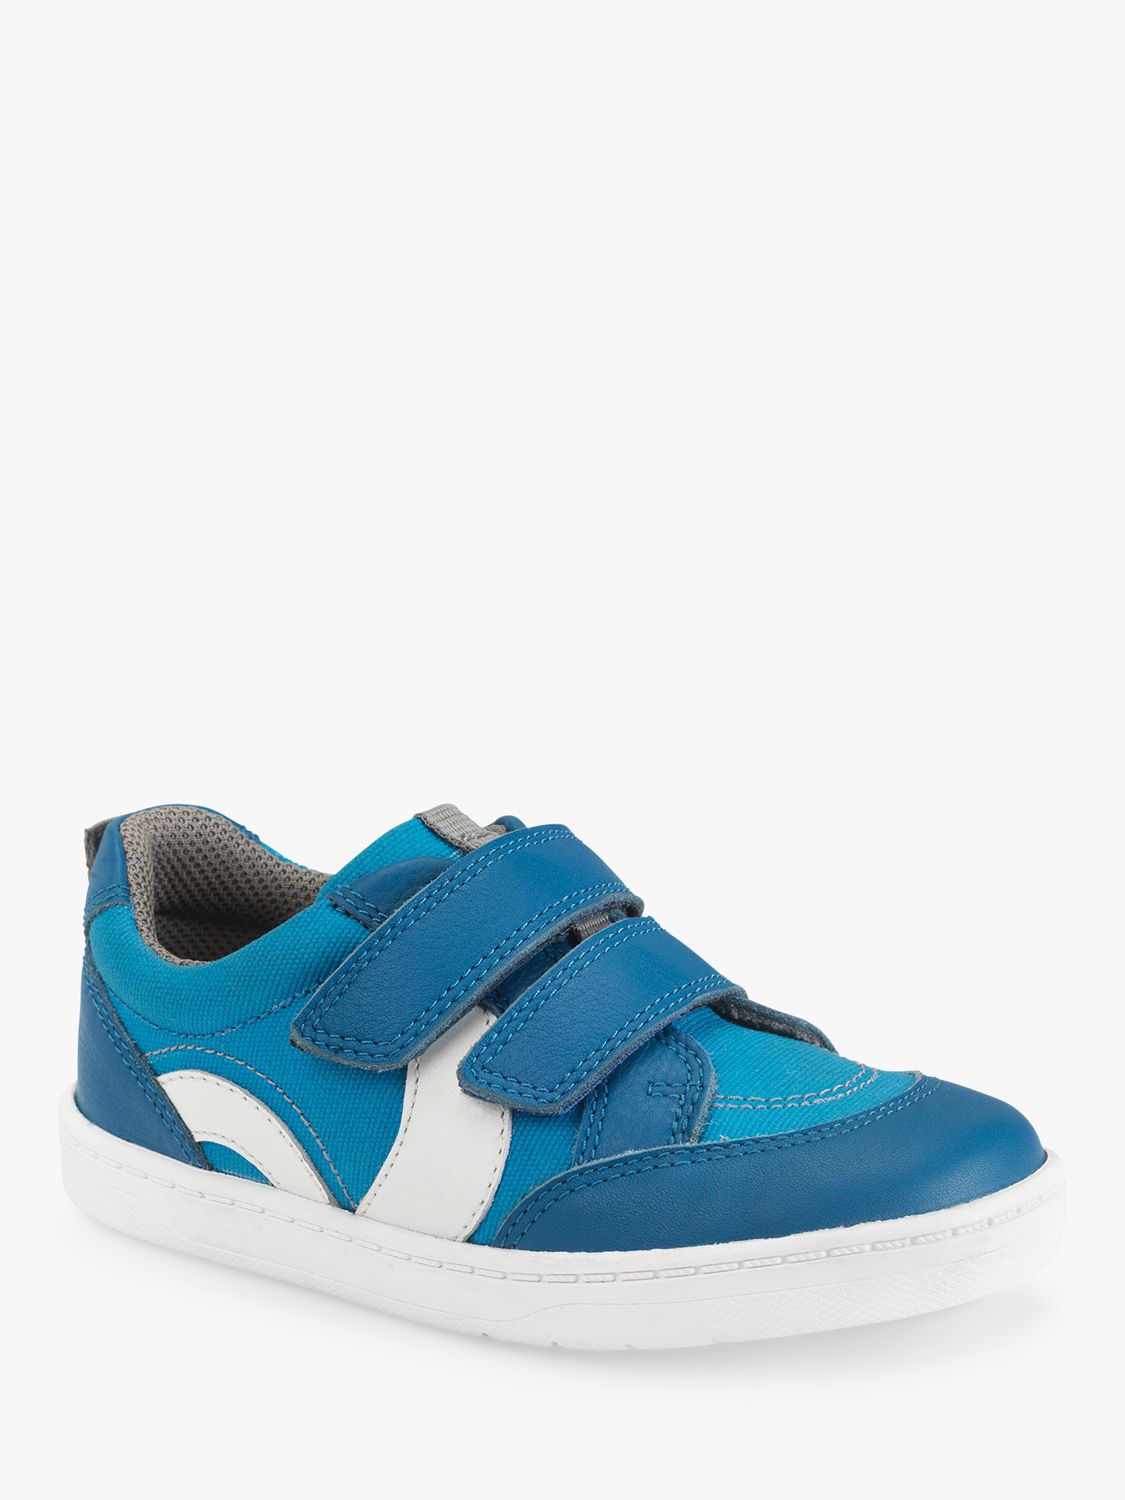 Start-Rite Kids' Enigma Leather Trainers, Bright Blue, 6G Jnr